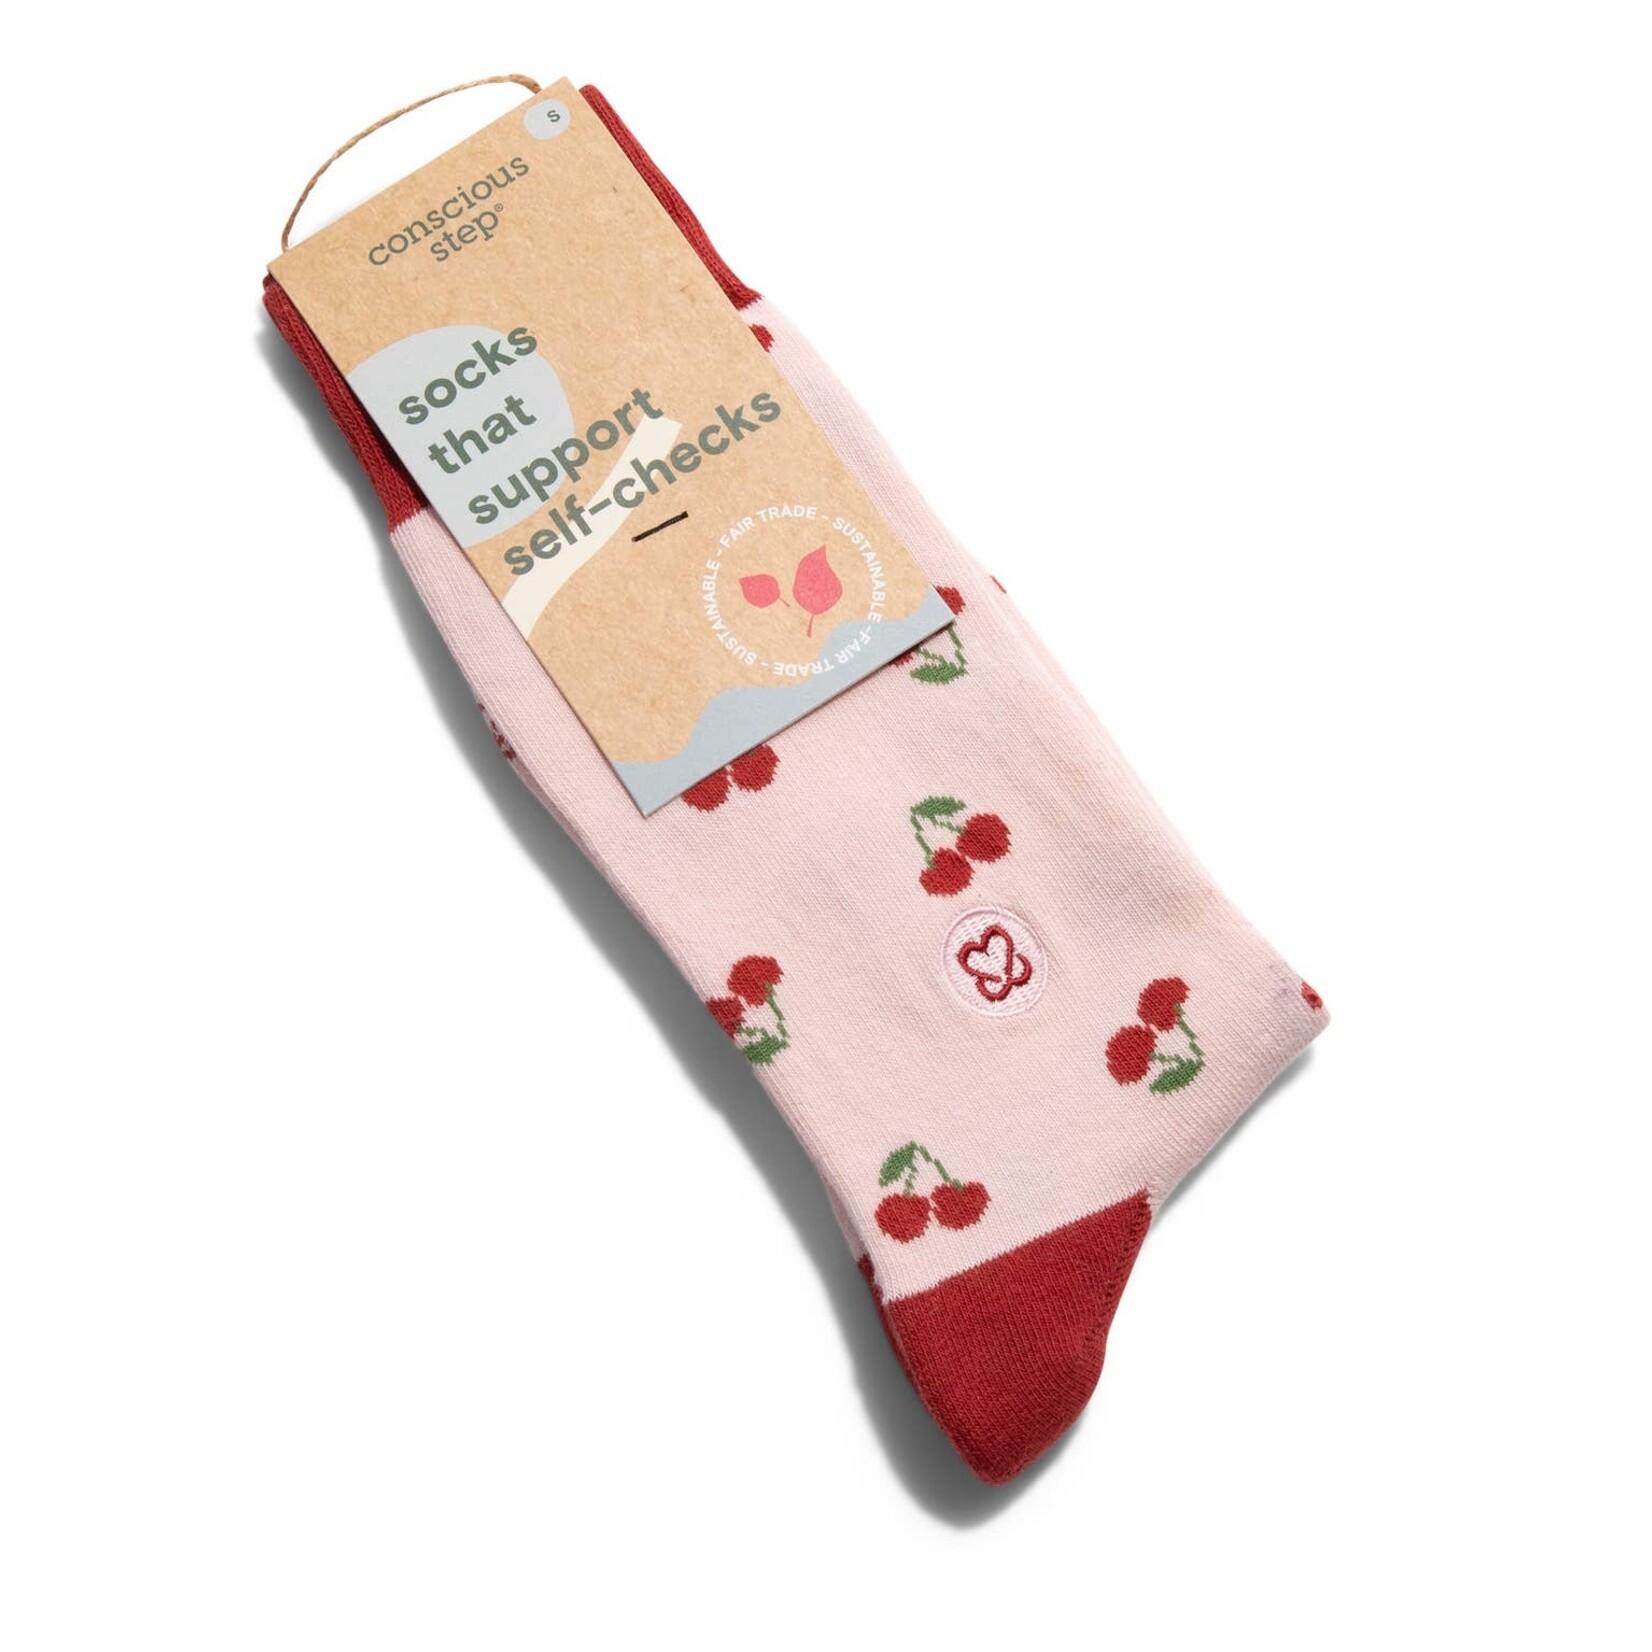 Conscious Step Socks that Support Self-Checks (Pink Cherries) MD